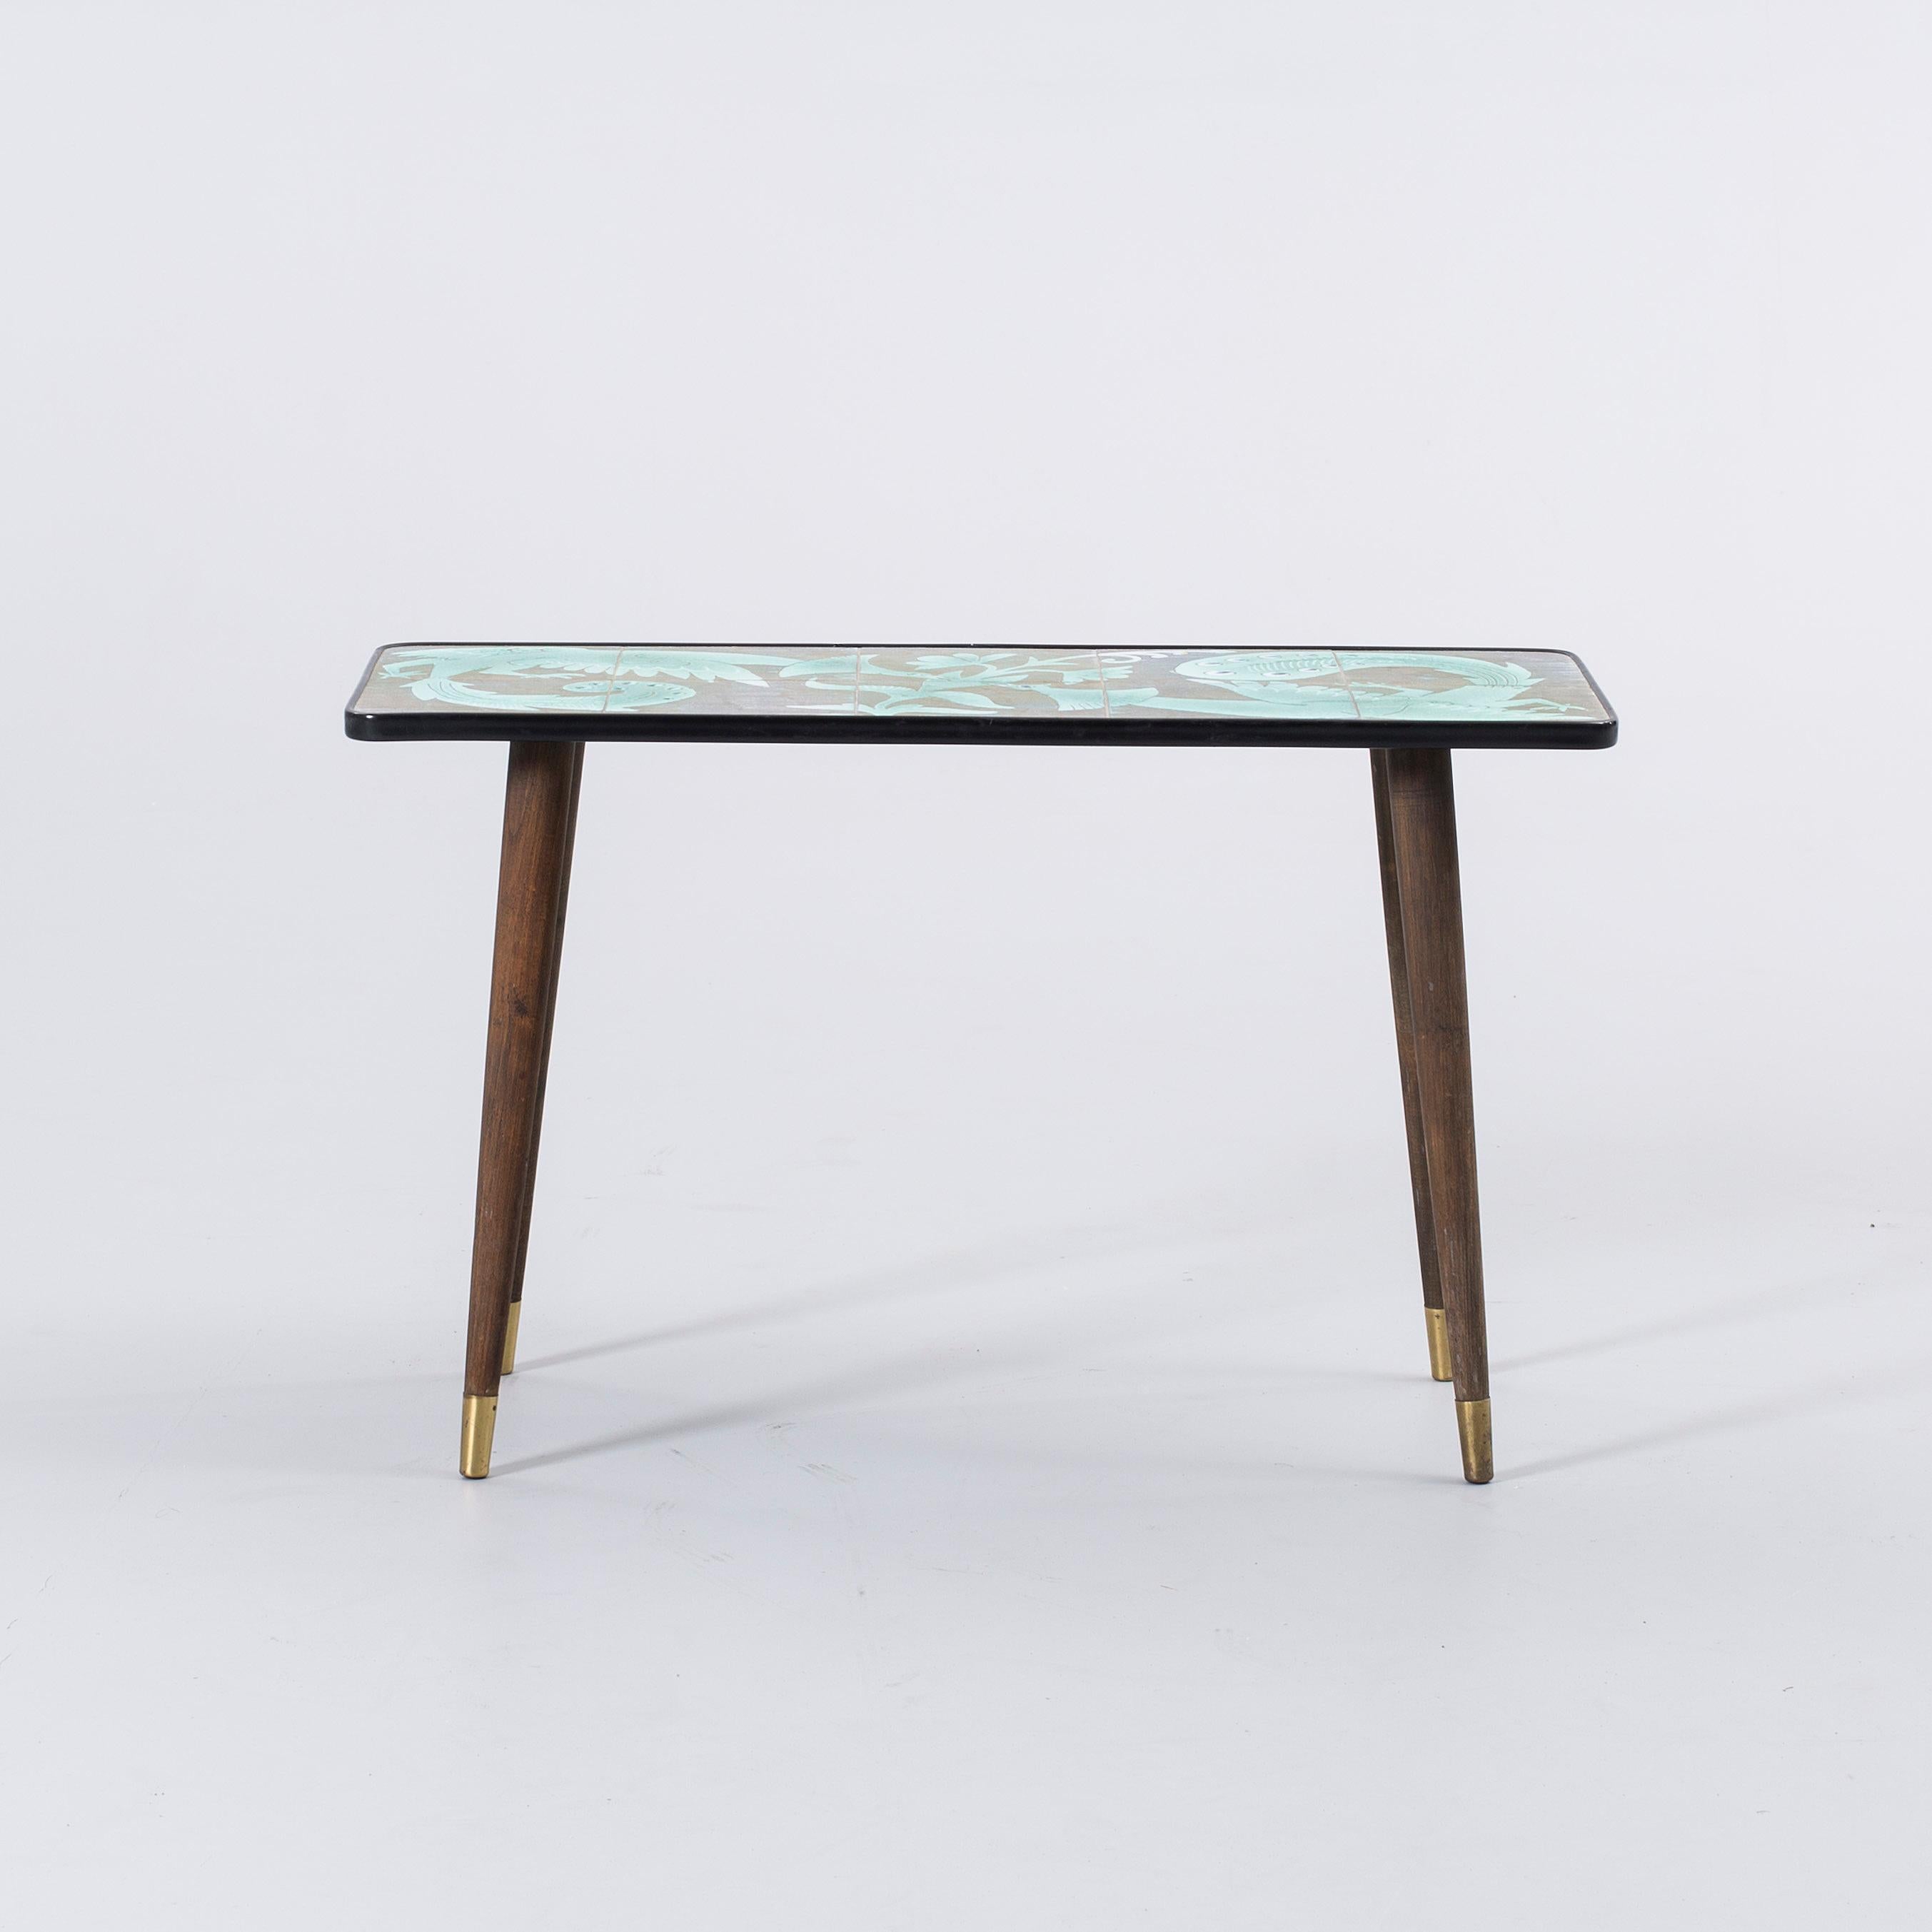 Marian Zawadzki hand painted ceramic low table for Tilgmans Dated 1961. Signed and dated. Good condition
 A one of a kind rare table by artist M. Zawadski by Atelier Tilgmans Sweden 1960 This Swedish midcentury Modernist design by Marian Zawadzki